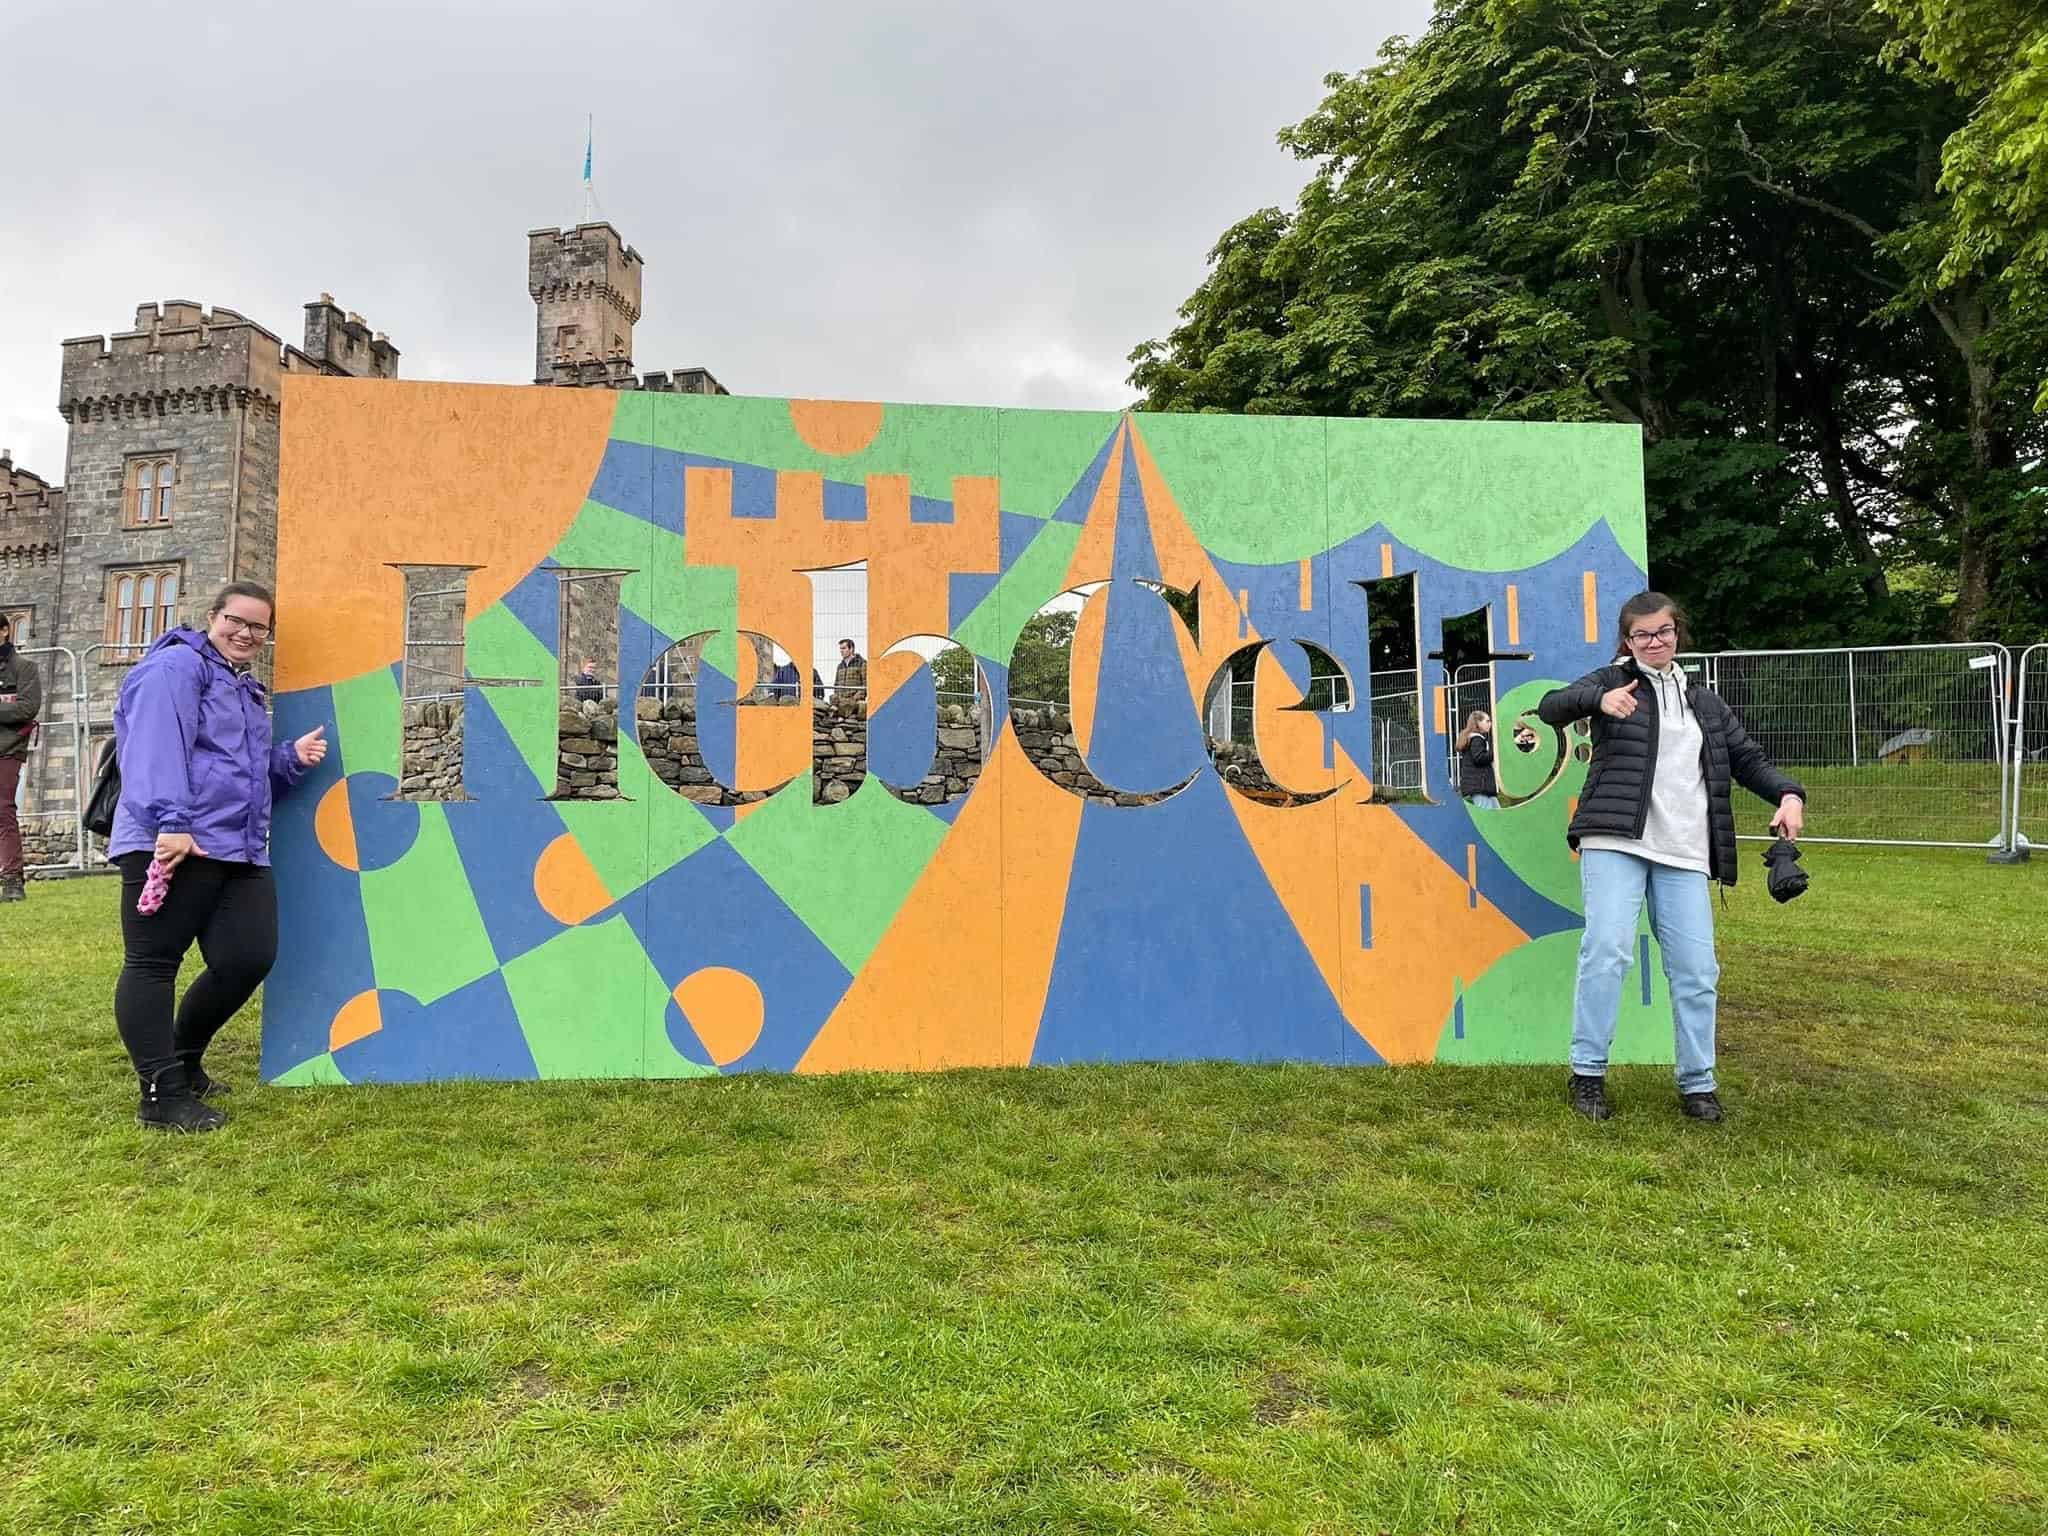 Hebcelt artwork board and two young people posing beside it